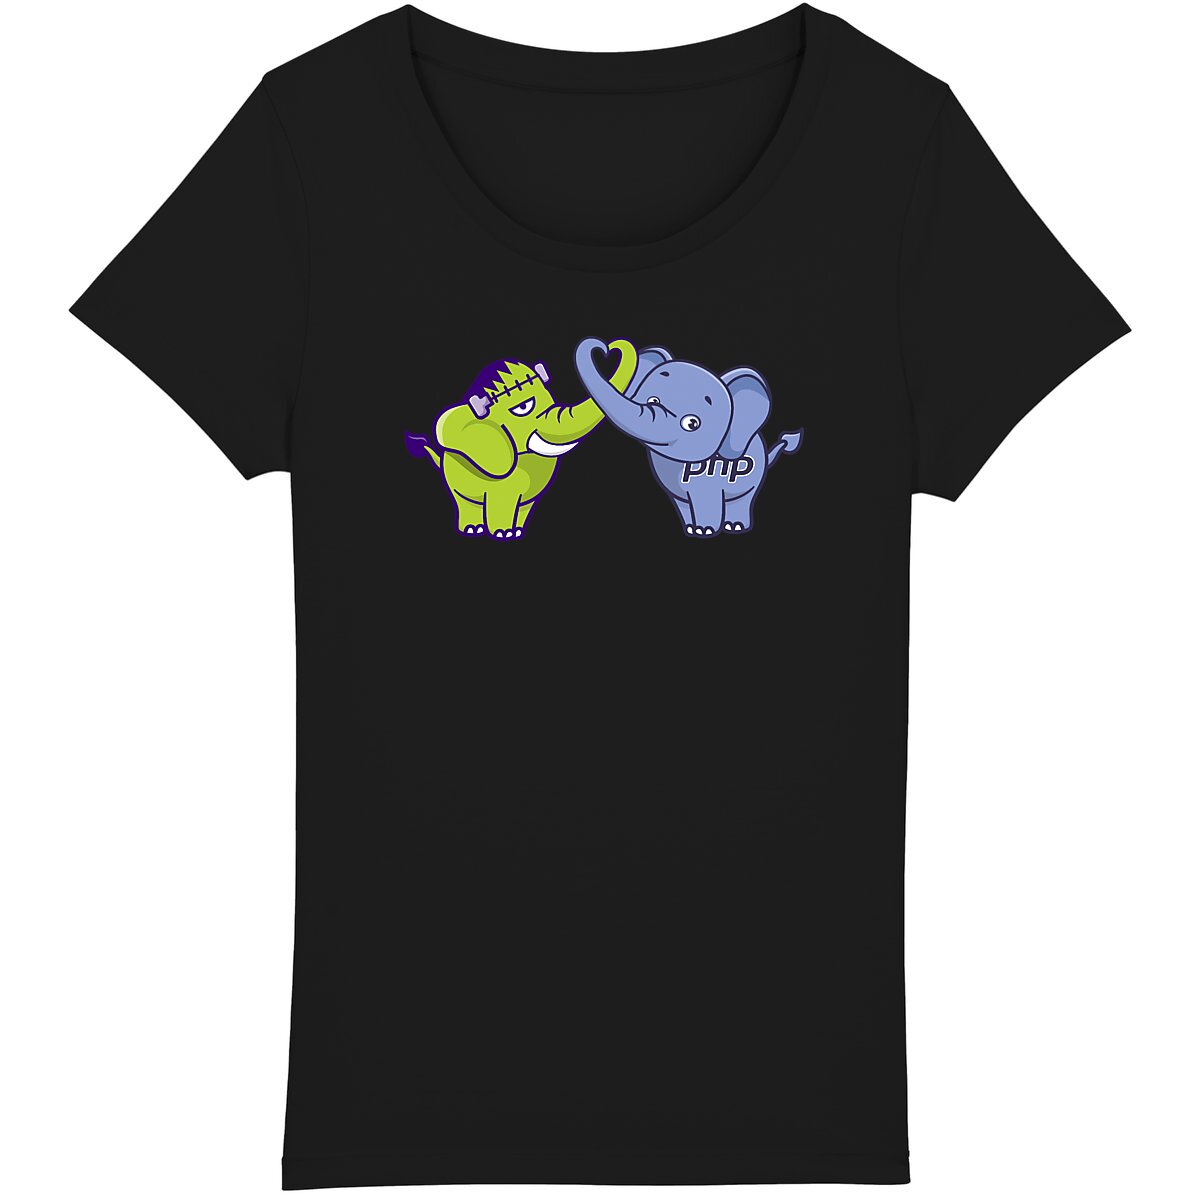 Women's T-shirt PHP Lover